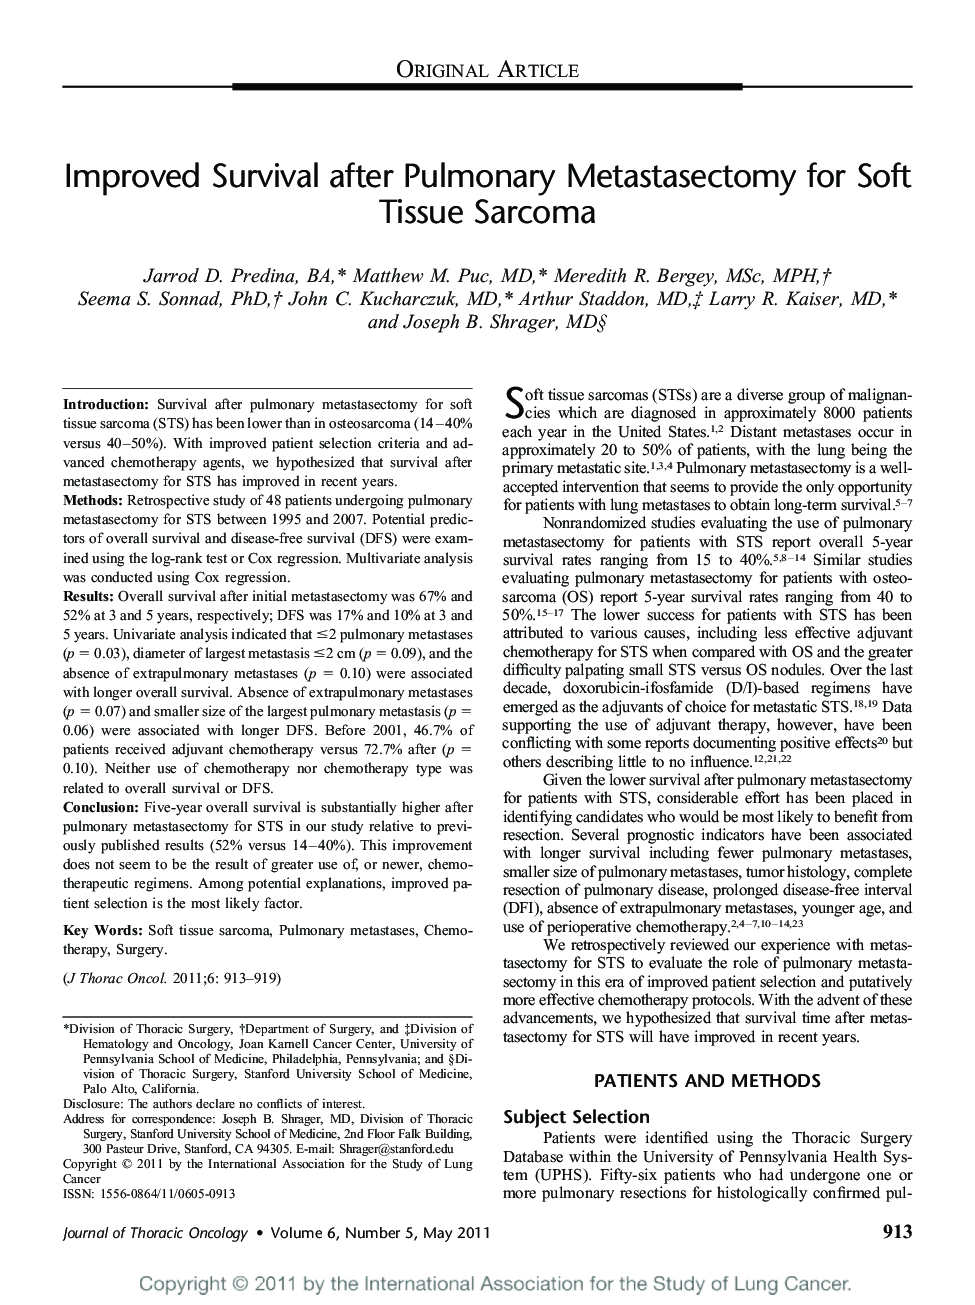 Improved Survival after Pulmonary Metastasectomy for Soft Tissue Sarcoma 